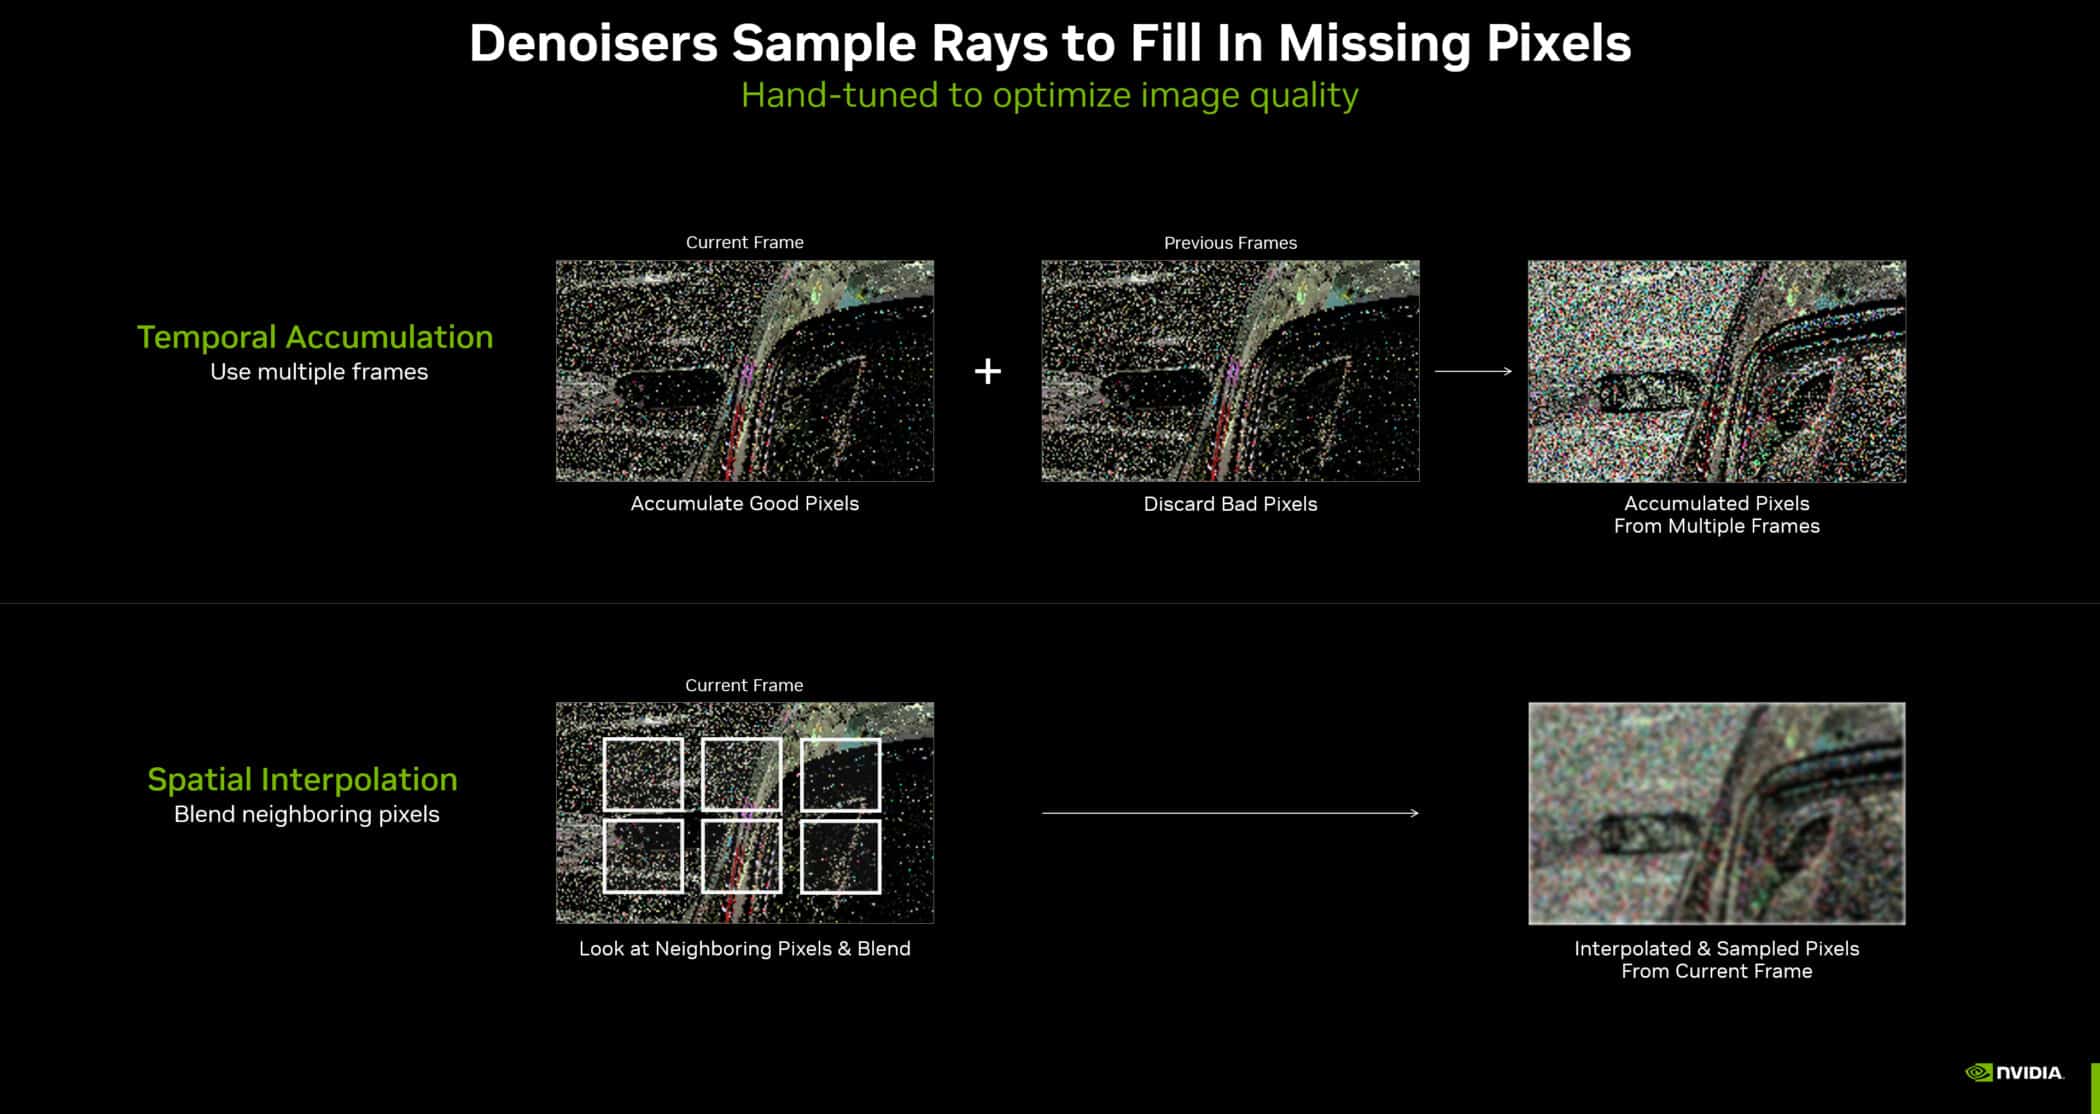 denoisers sample rays to fill in missing pixels